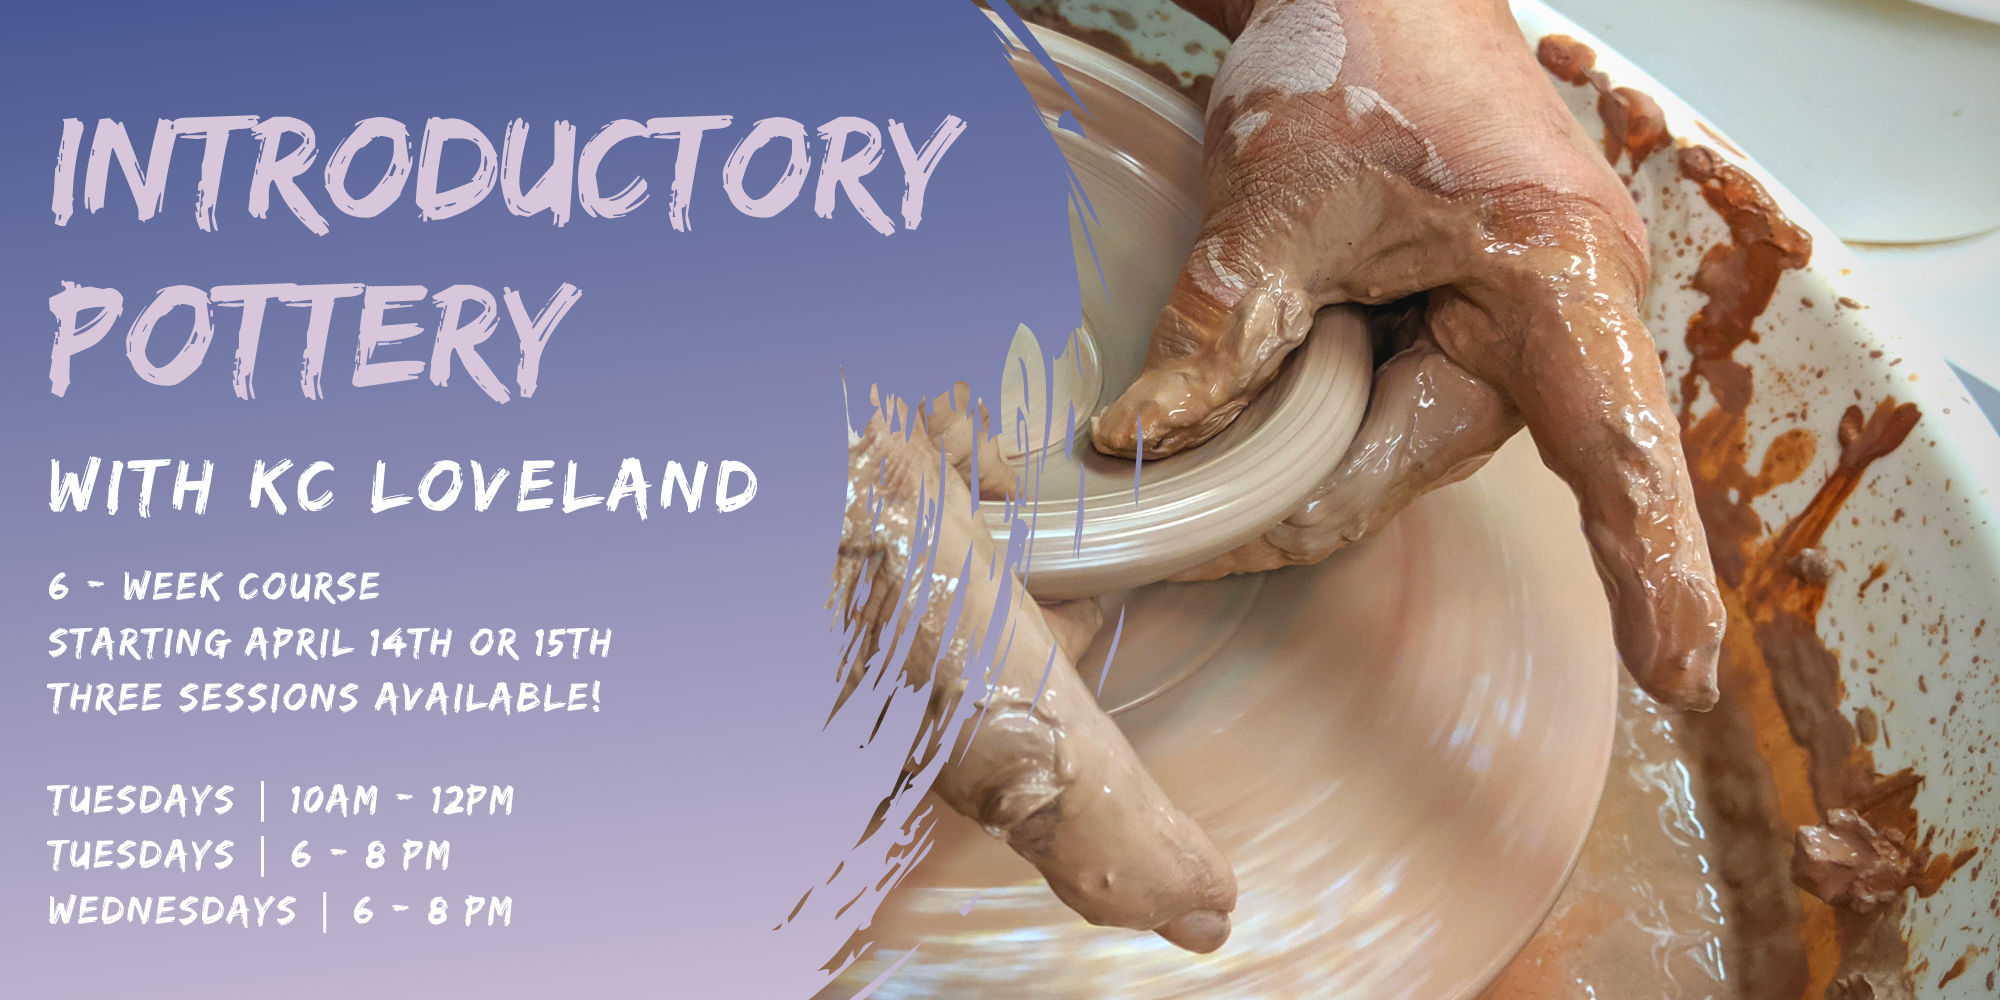 Introductory Pottery with KC Loveland: Tuesday AM